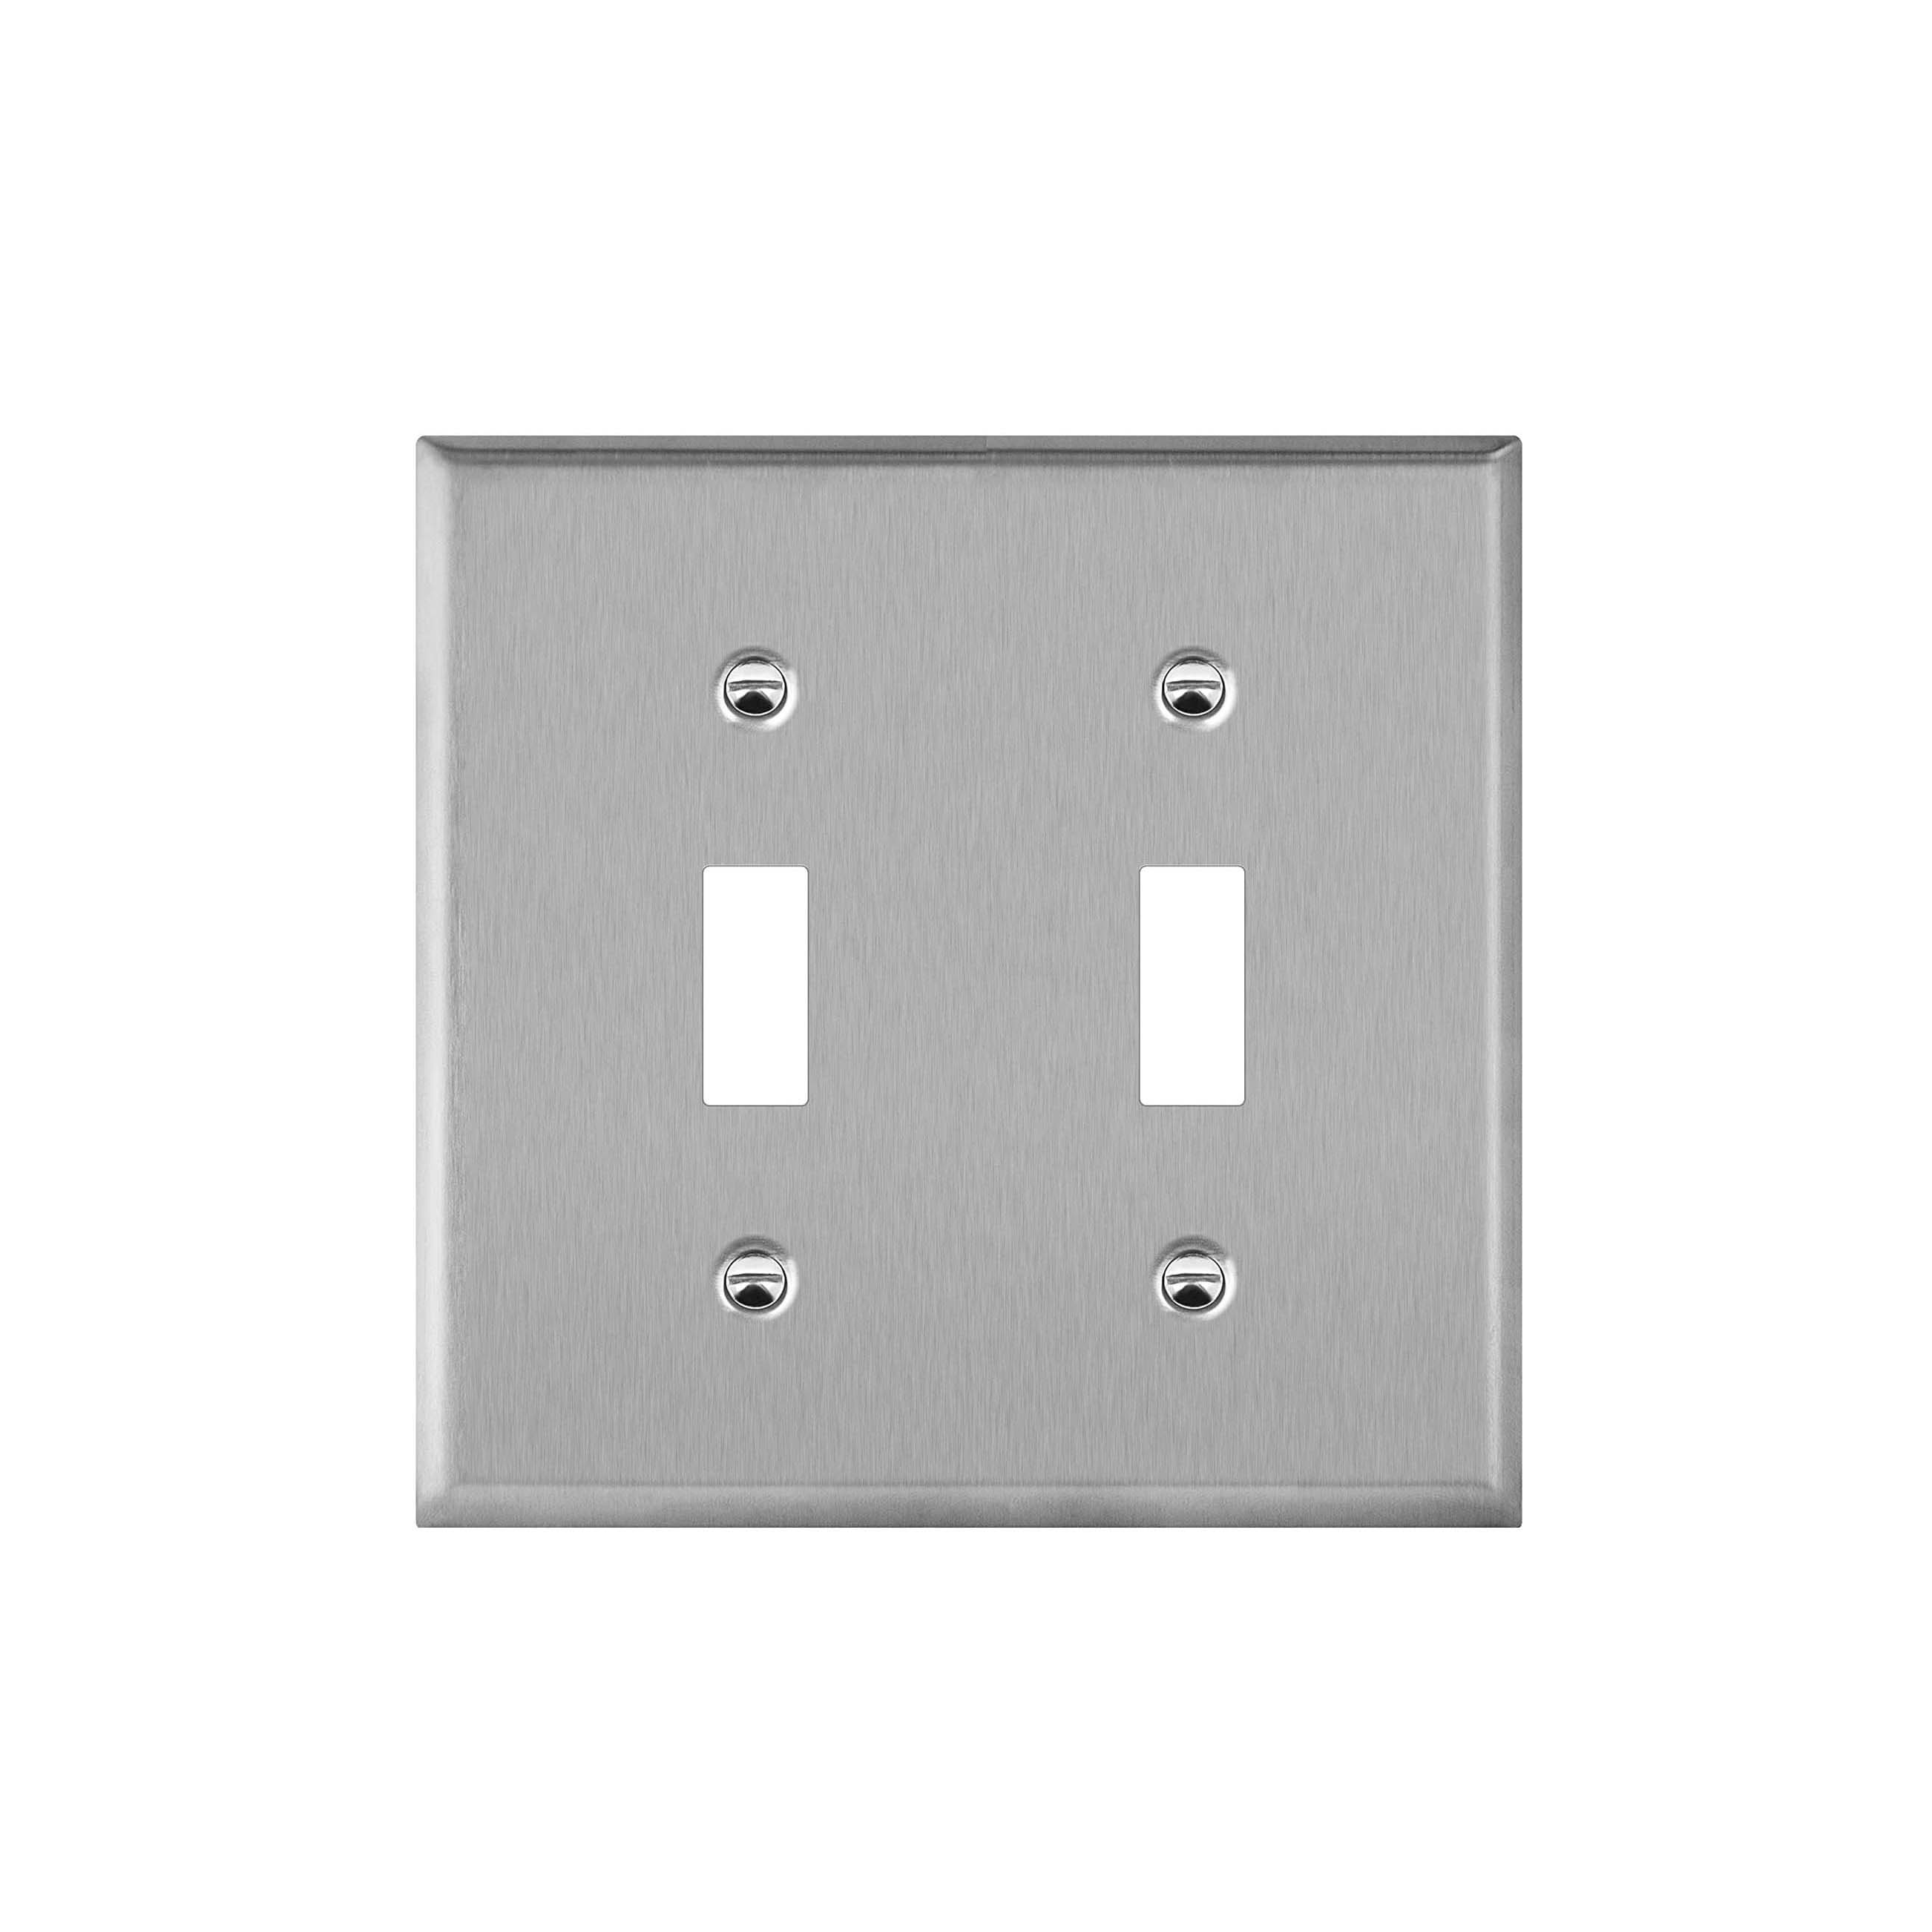  2 Gang Toggle Wall Switch Stainless Steel Wall Plate WP2122